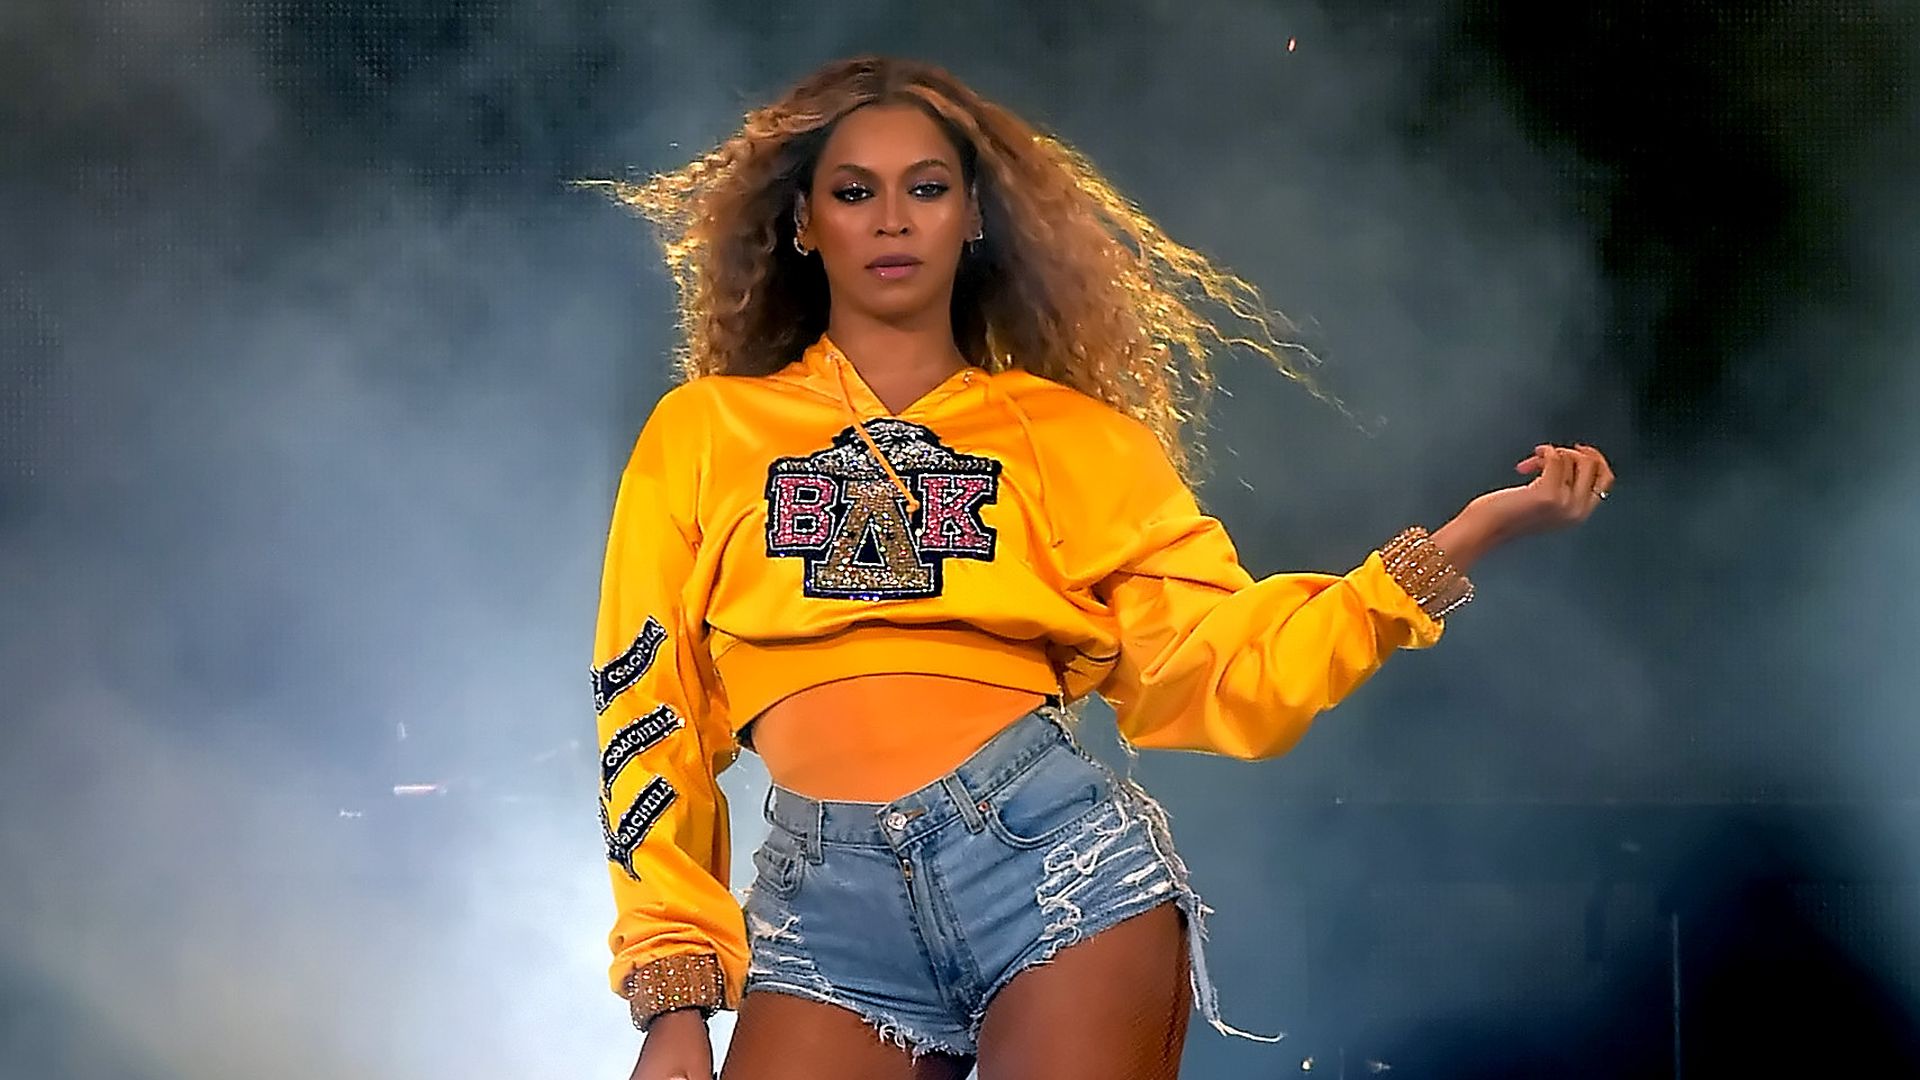 Beyonce a the 2018 Coachella Valley Music And Arts Festival.